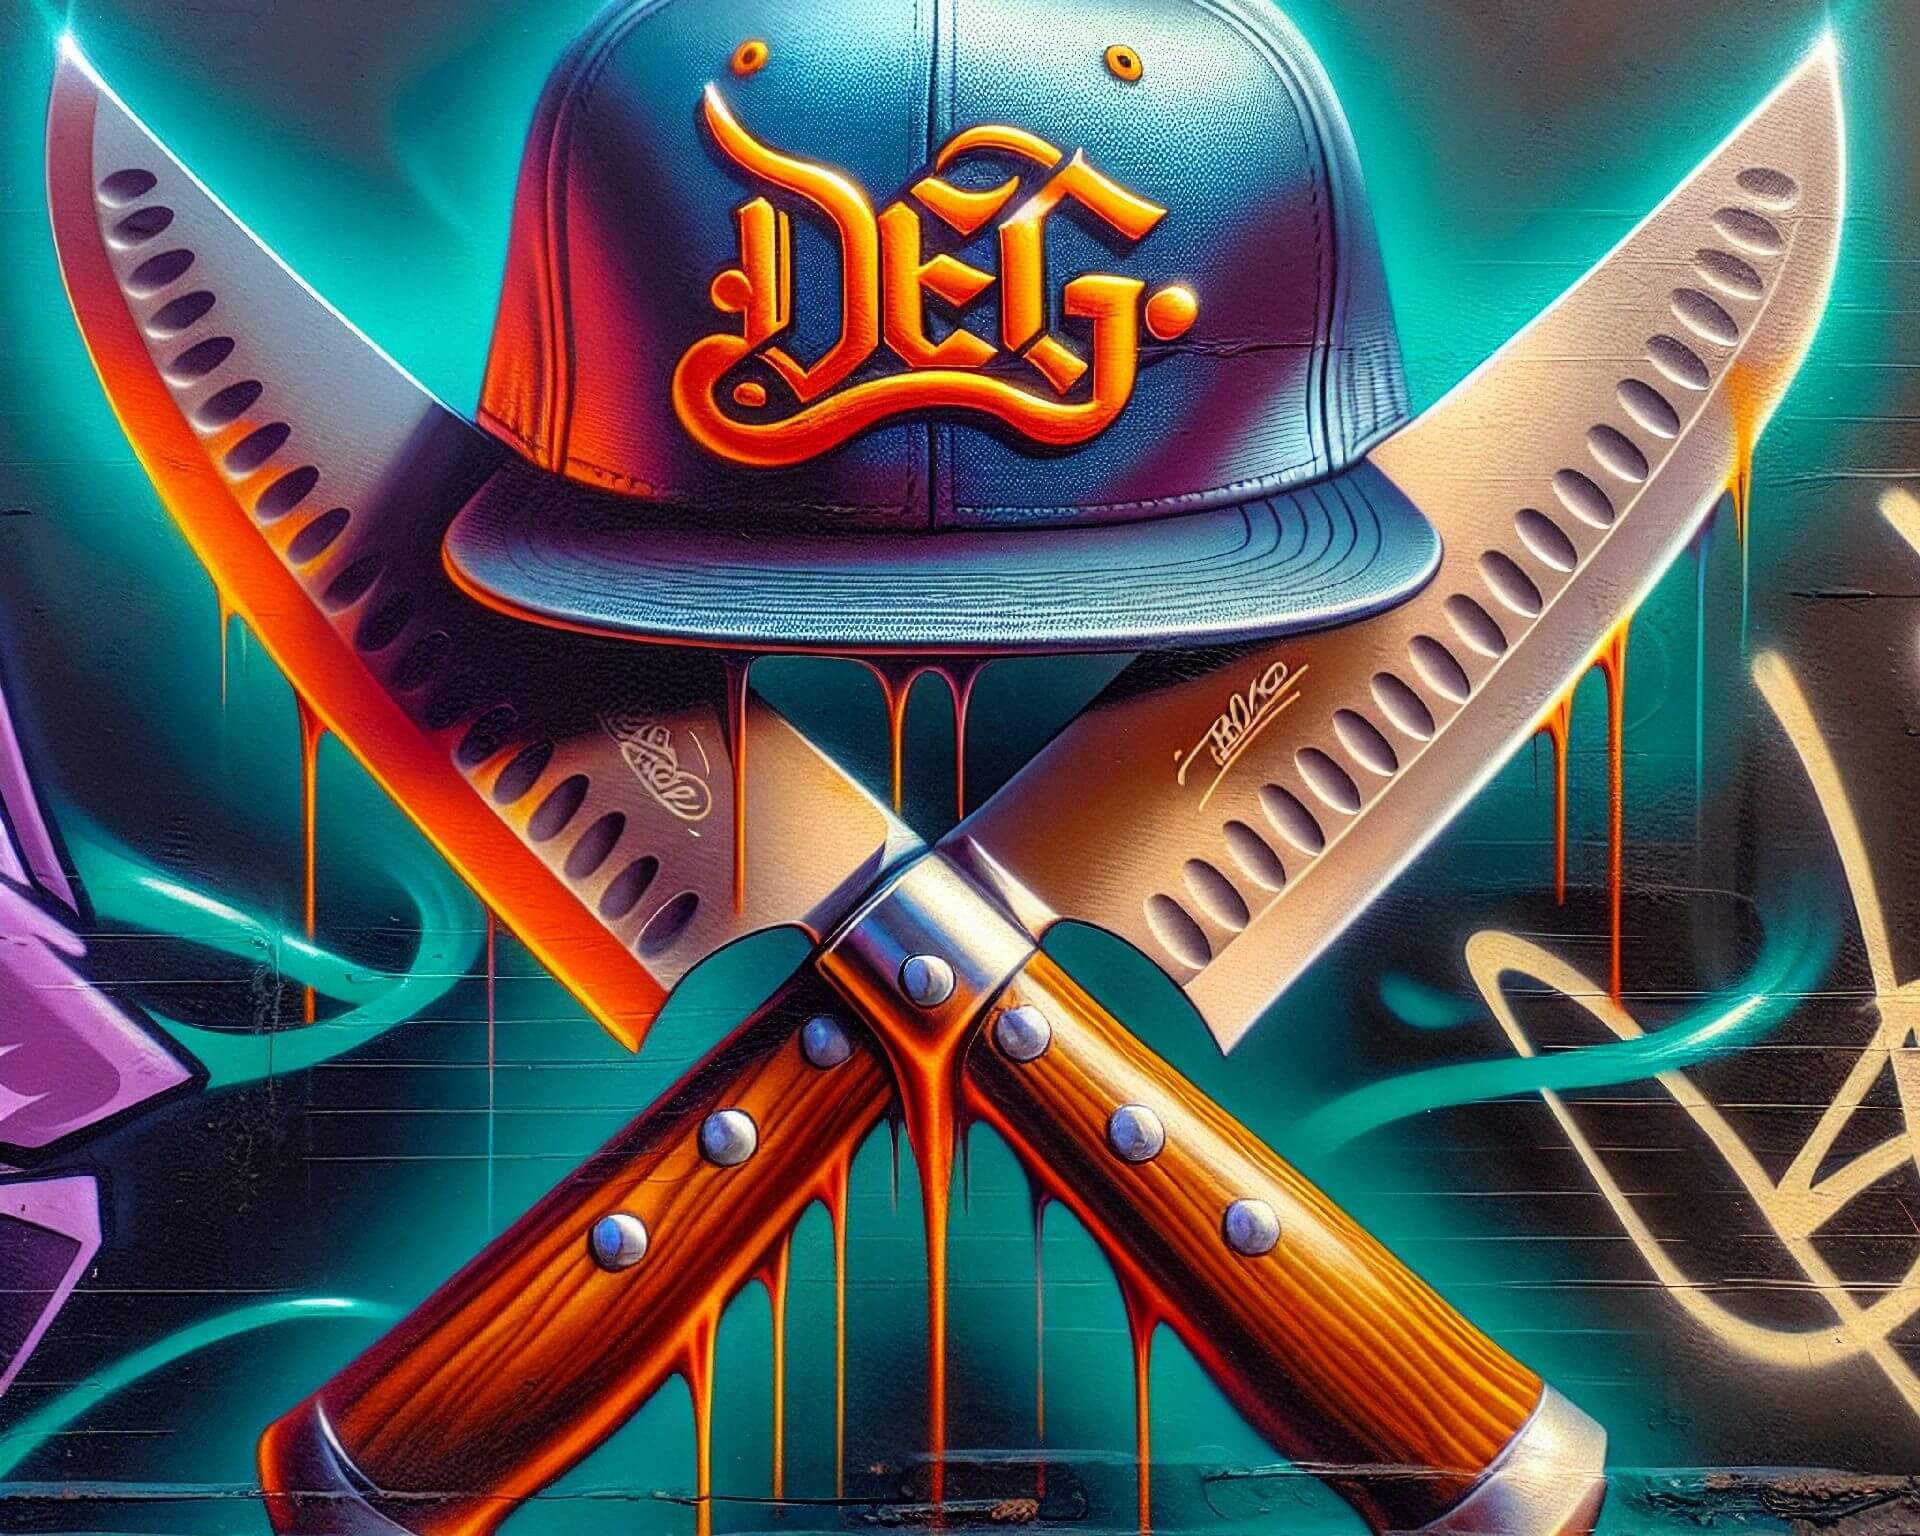 Graffiti of crossed chef's knives underneath a baseball cap that reads, "D.E.G."